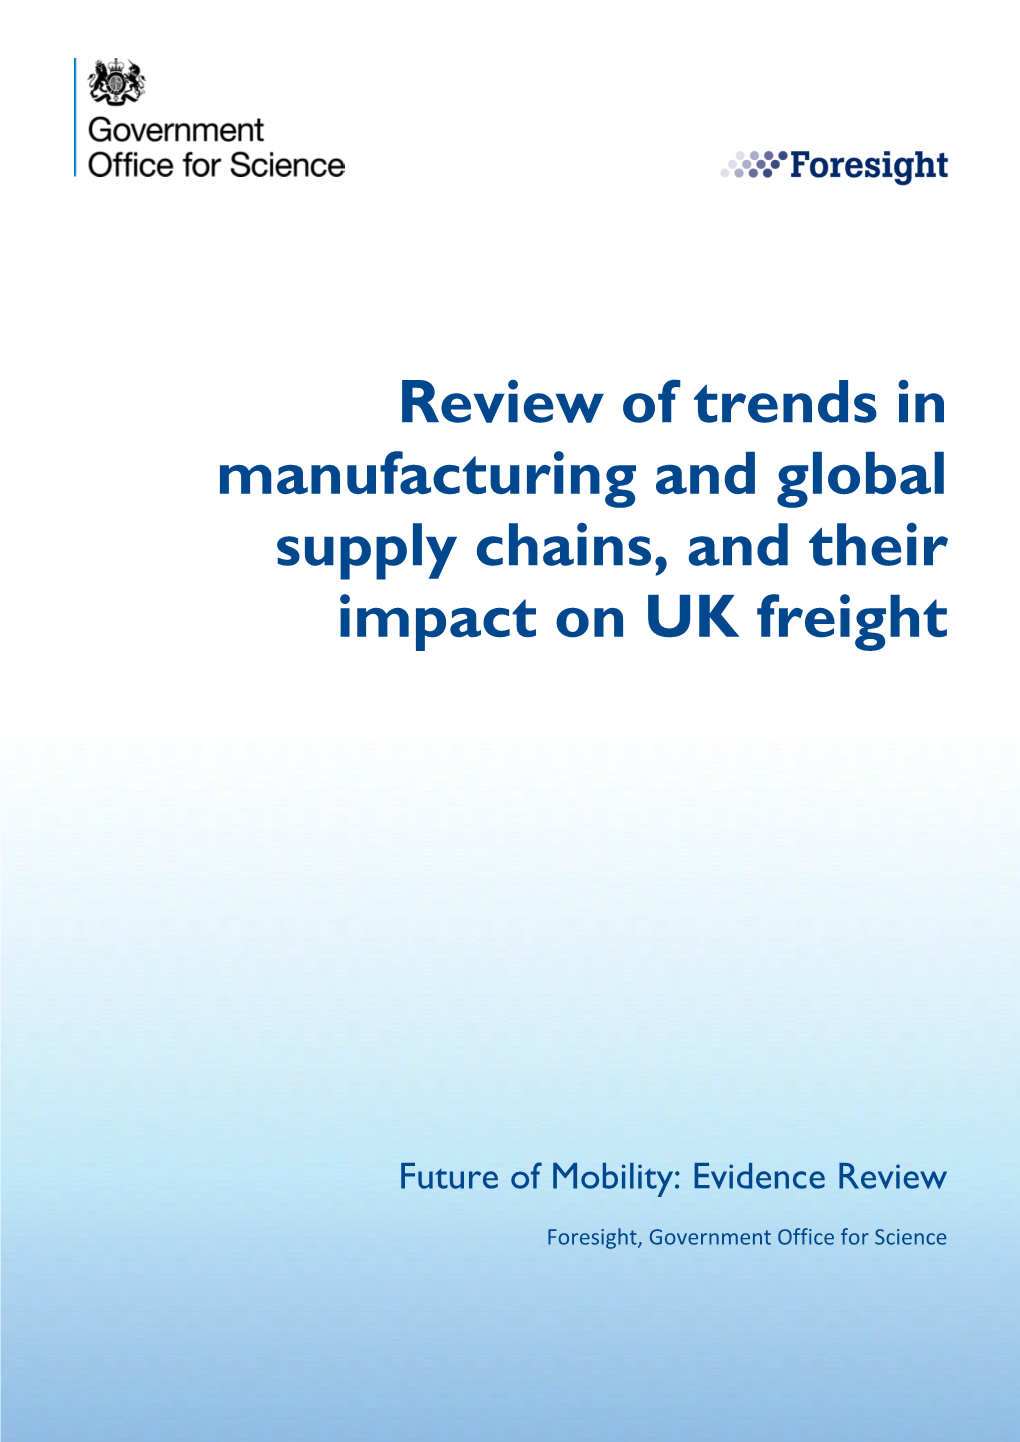 Trends in Manufacturing and Global Supply Chains and Their Impact on UK Freight